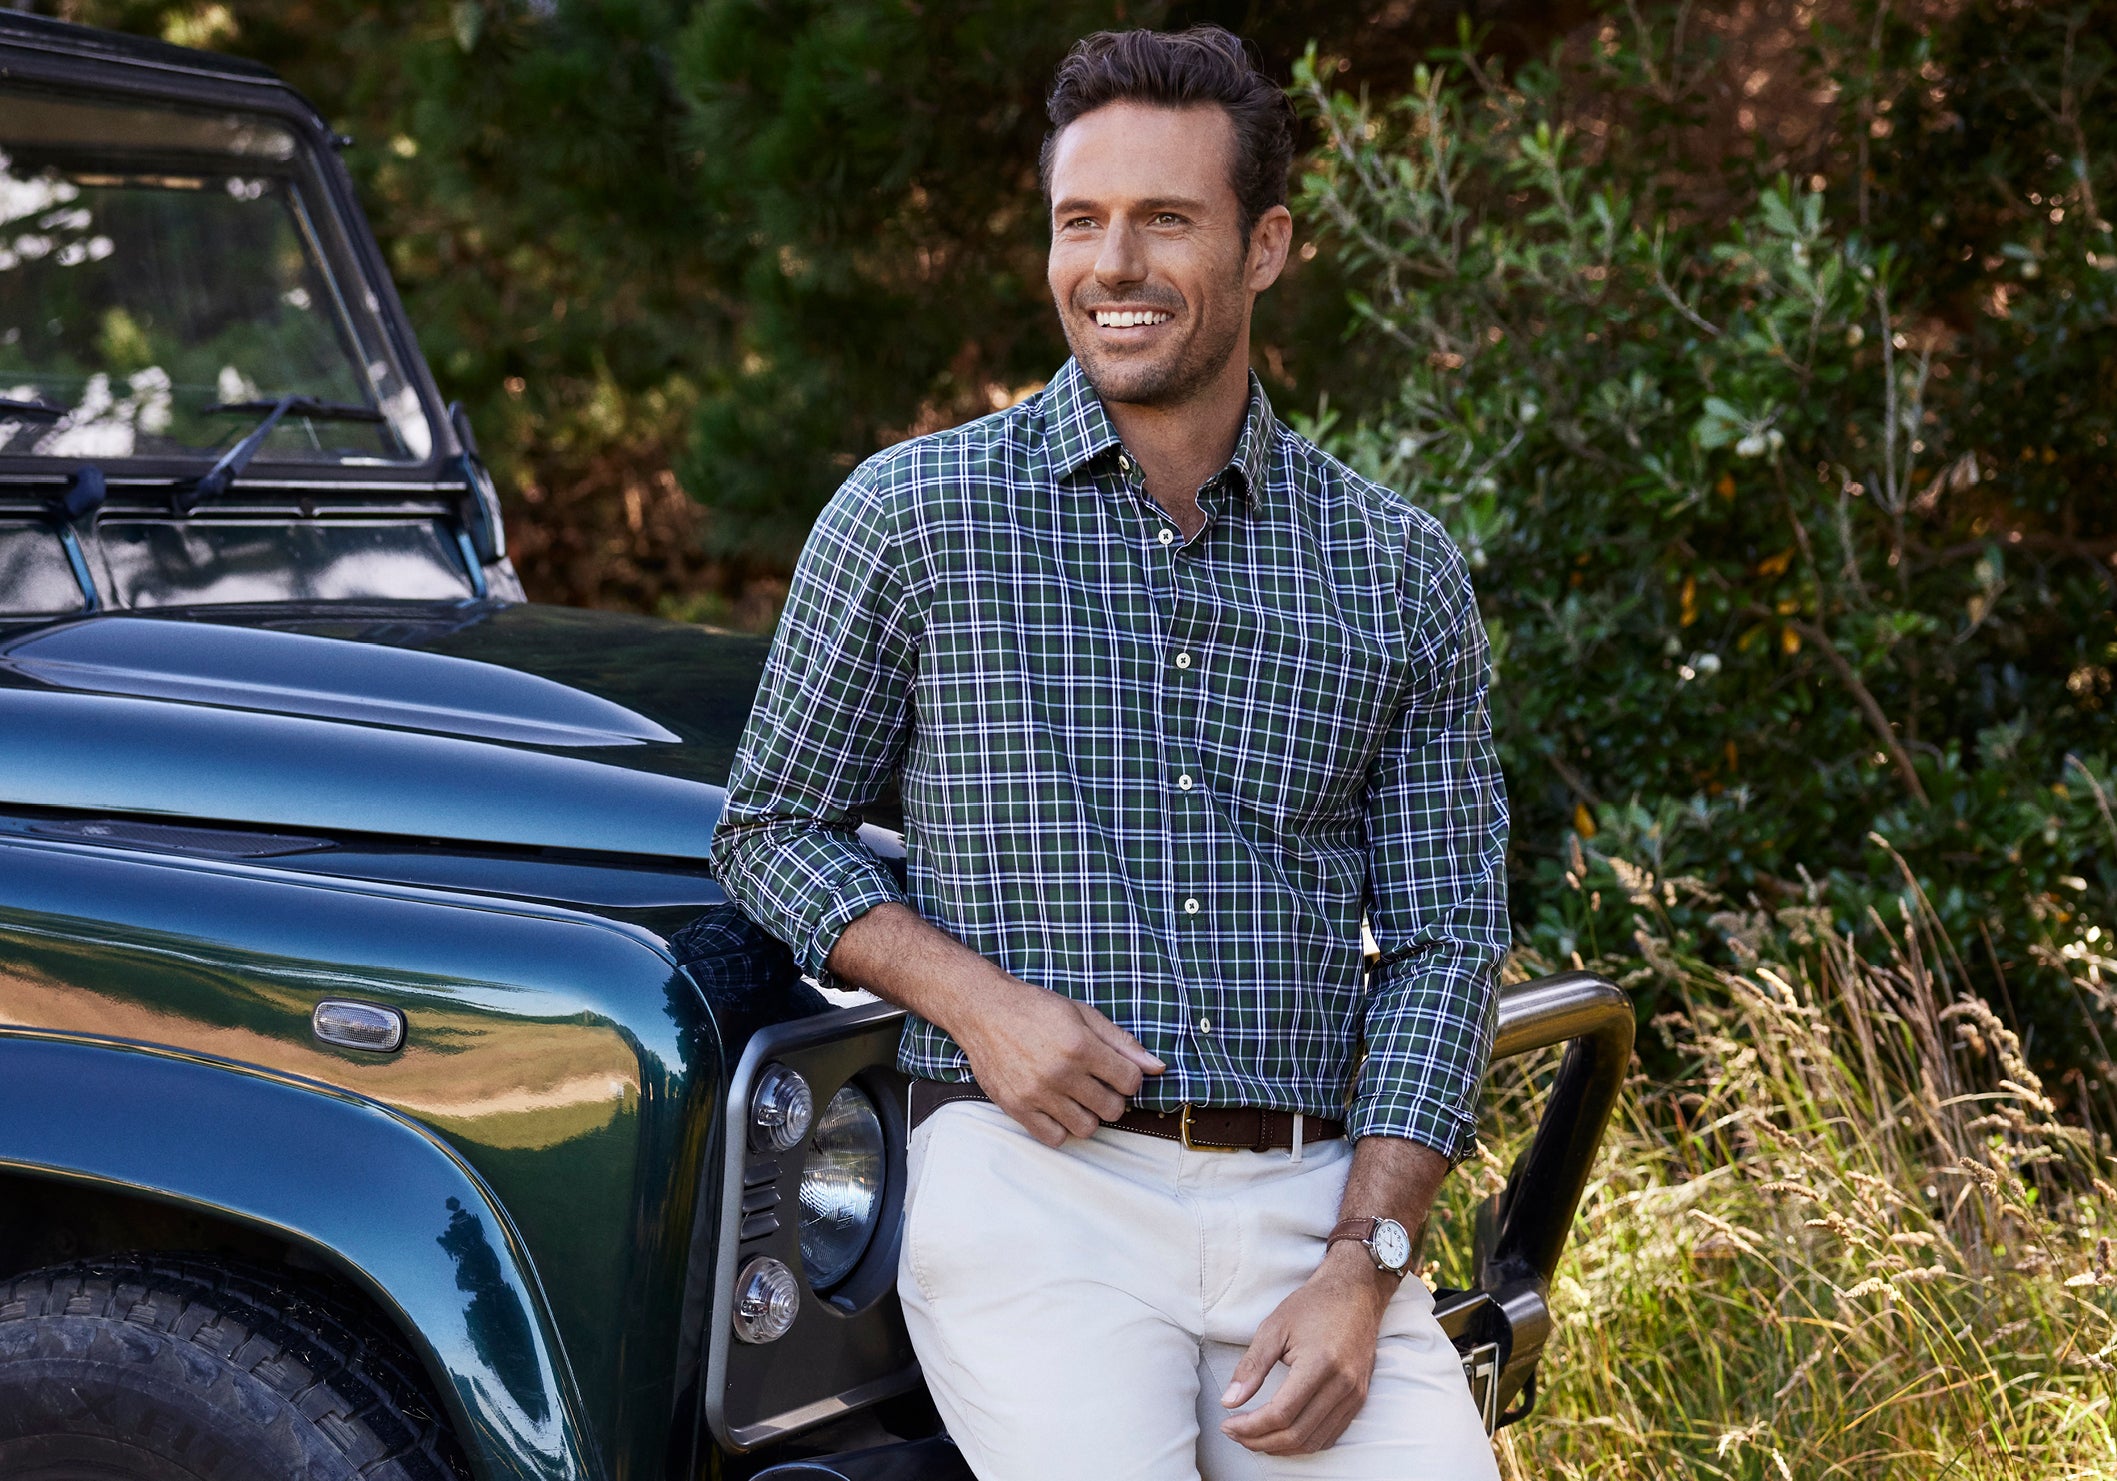 Wrinkle-free shirts, elegant and casual at the same time